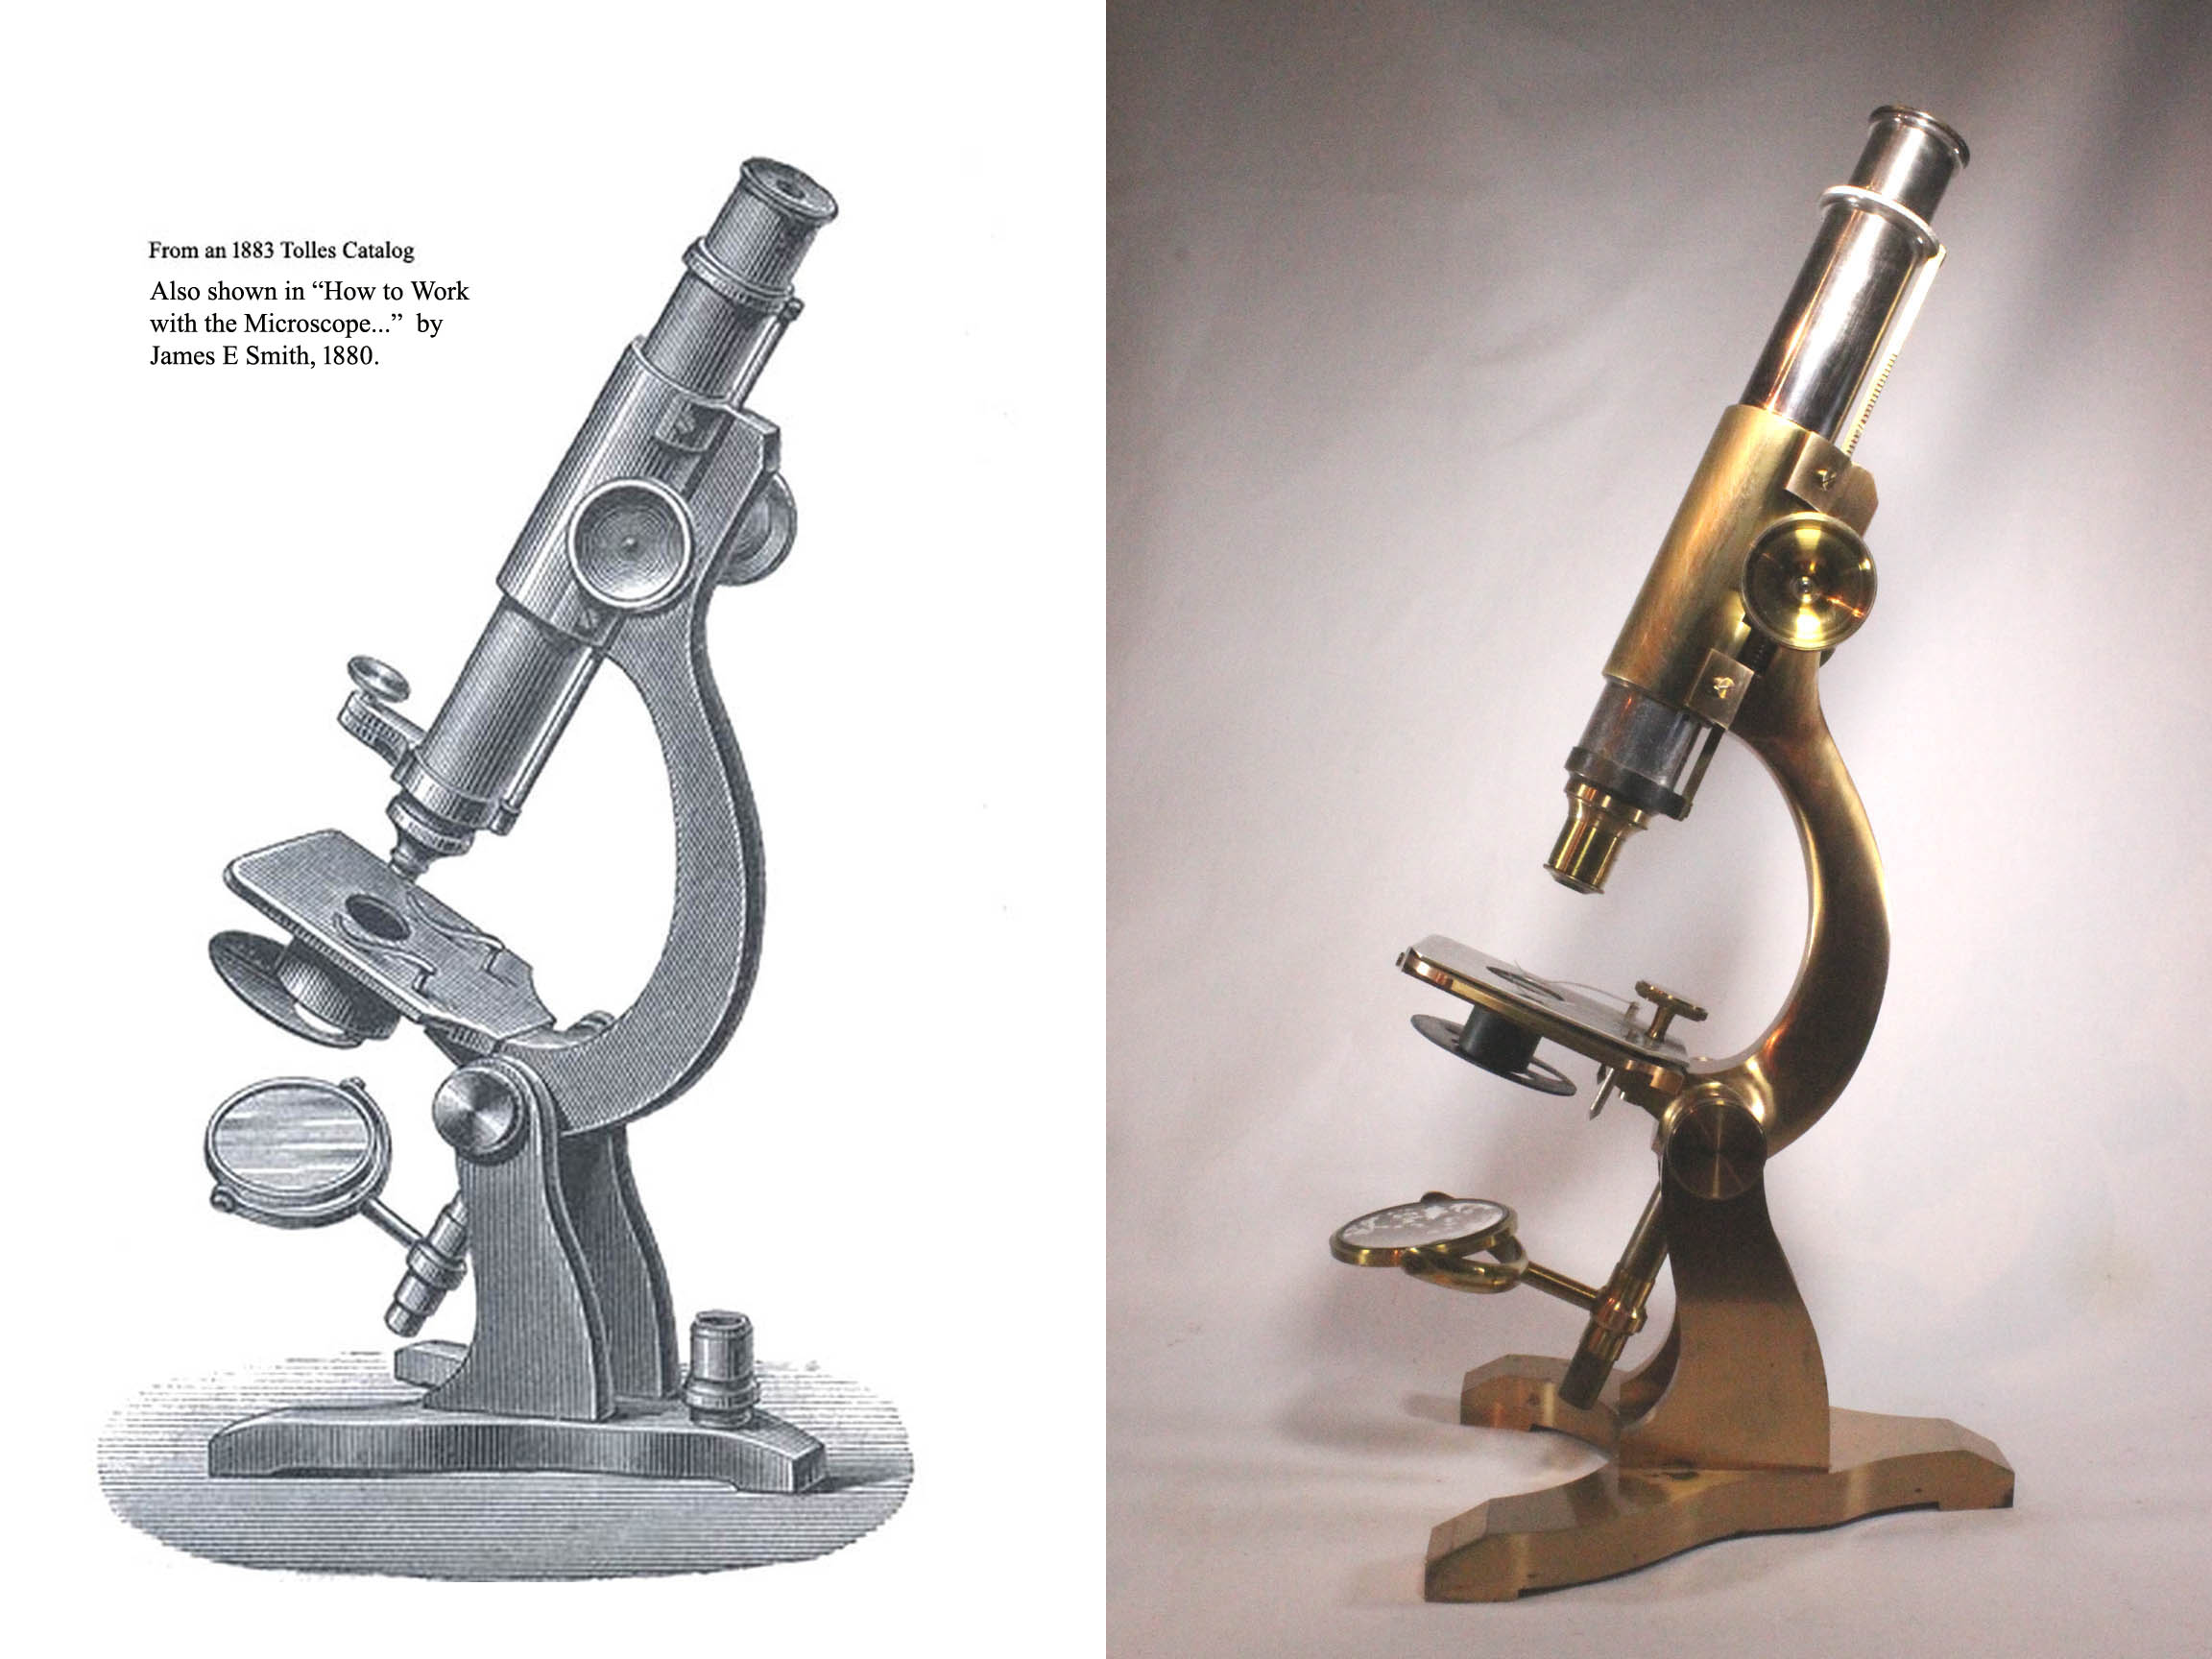 Tolles Student Microscope with Engraving